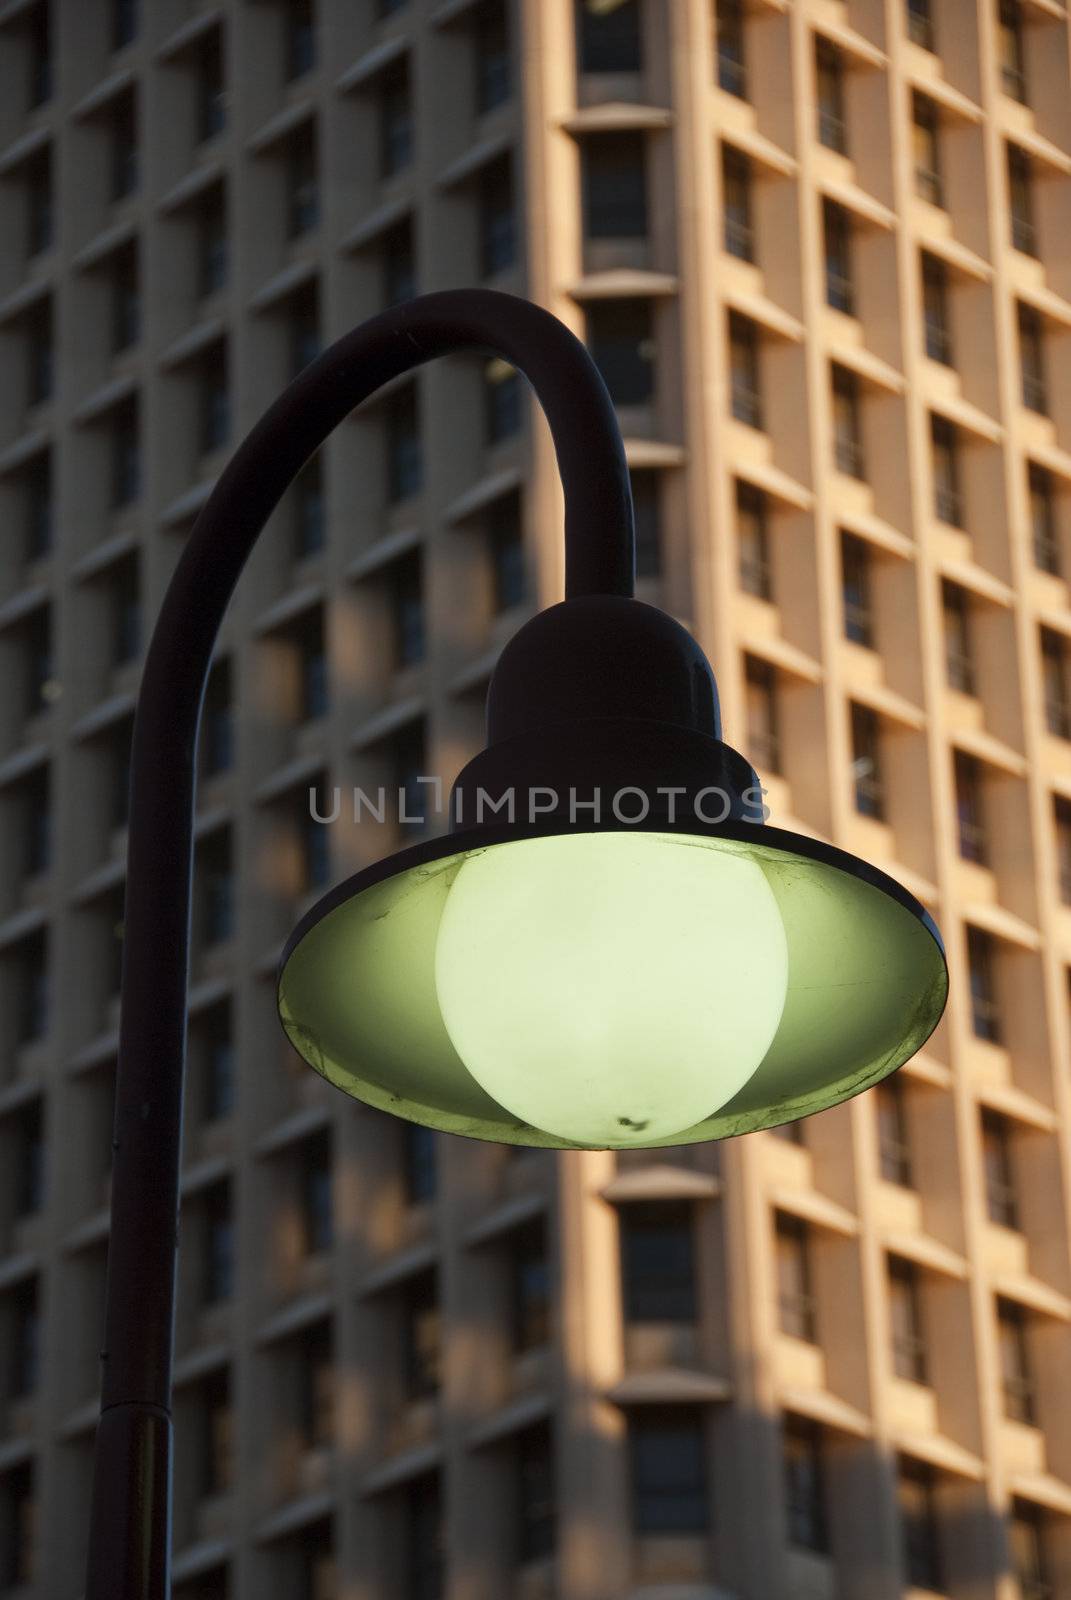 A street lamp in the city of Brisbane